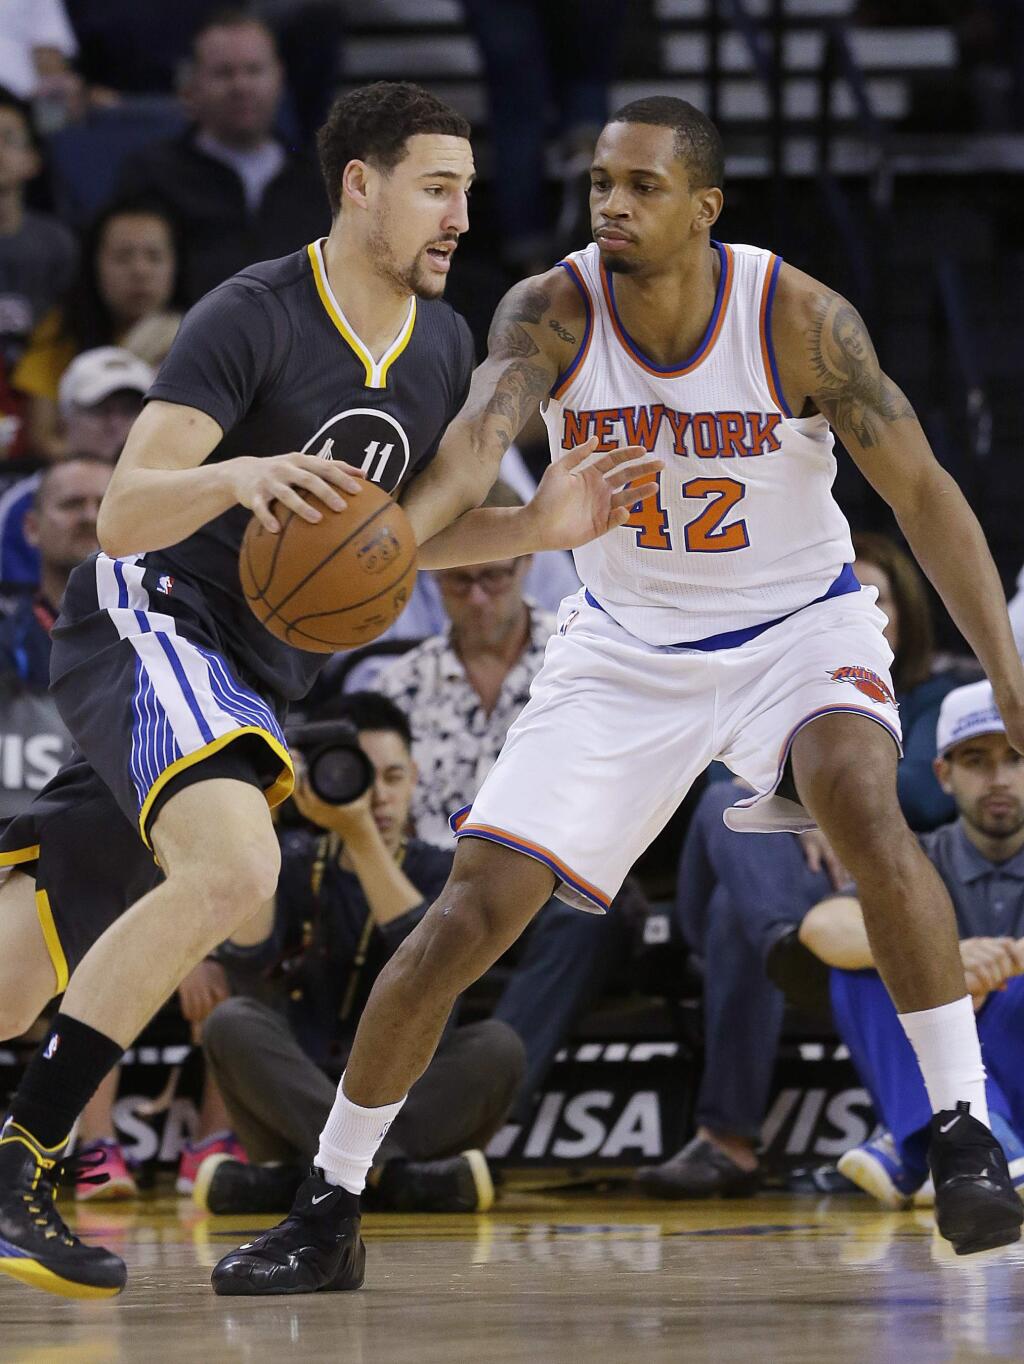 Golden State Warriors guard Klay Thompson (11) drives against New York Knicks forward Lance Thomas (42) during the first half of a game in Oakland, Saturday, March 14, 2015. (AP Photo/Jeff Chiu)